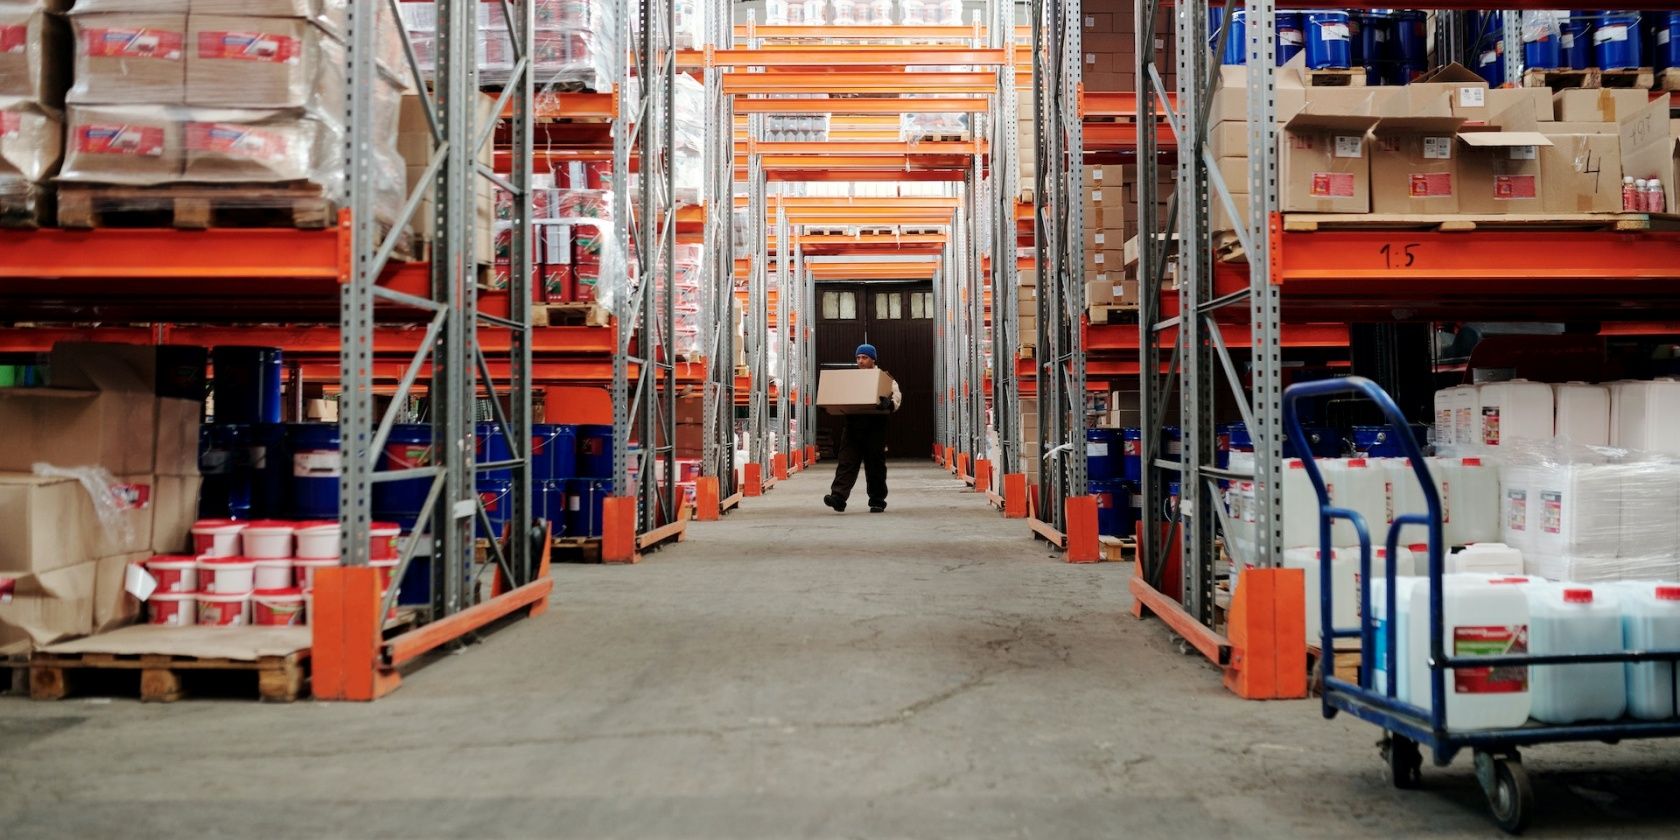 Person carrying a box in an aisle of a warehouse